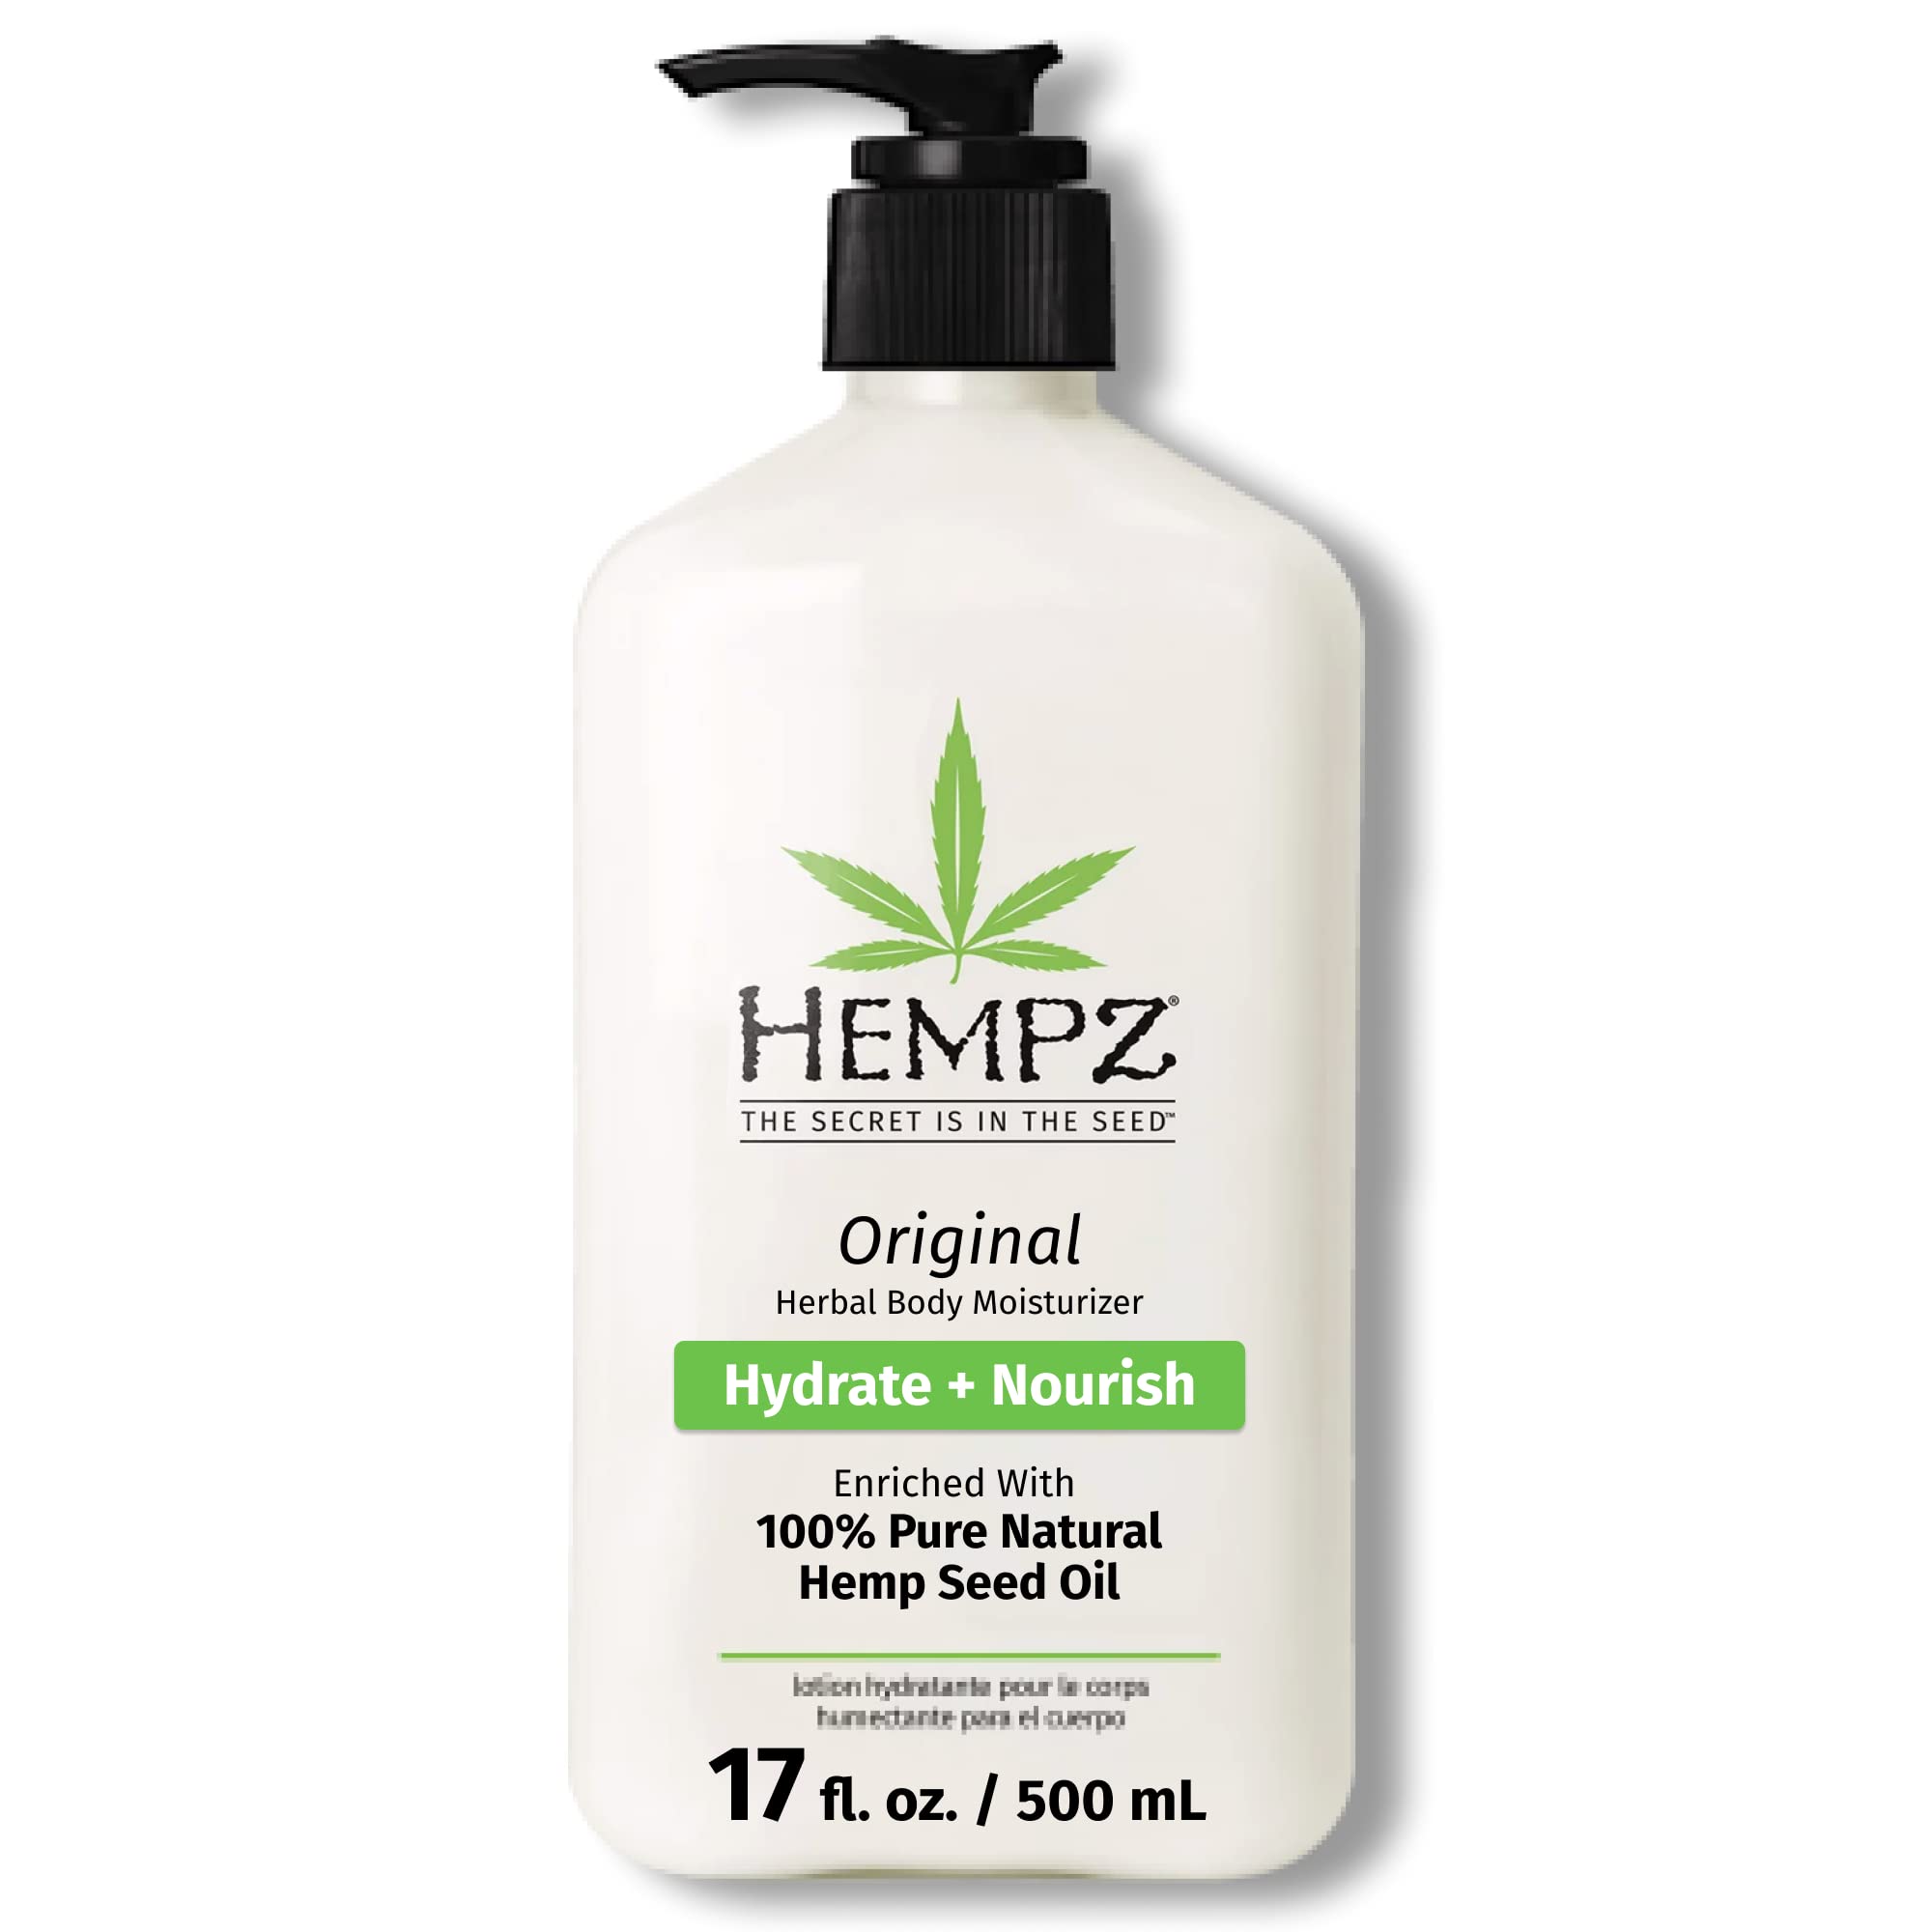 Hempz Pure Herbal Extract:Original Herbal Body Moisturizer, Hydrate + nourish,Enriched with 100% Natural Hemp Seed Oil,Herbal Body Moisturizer,17 fl